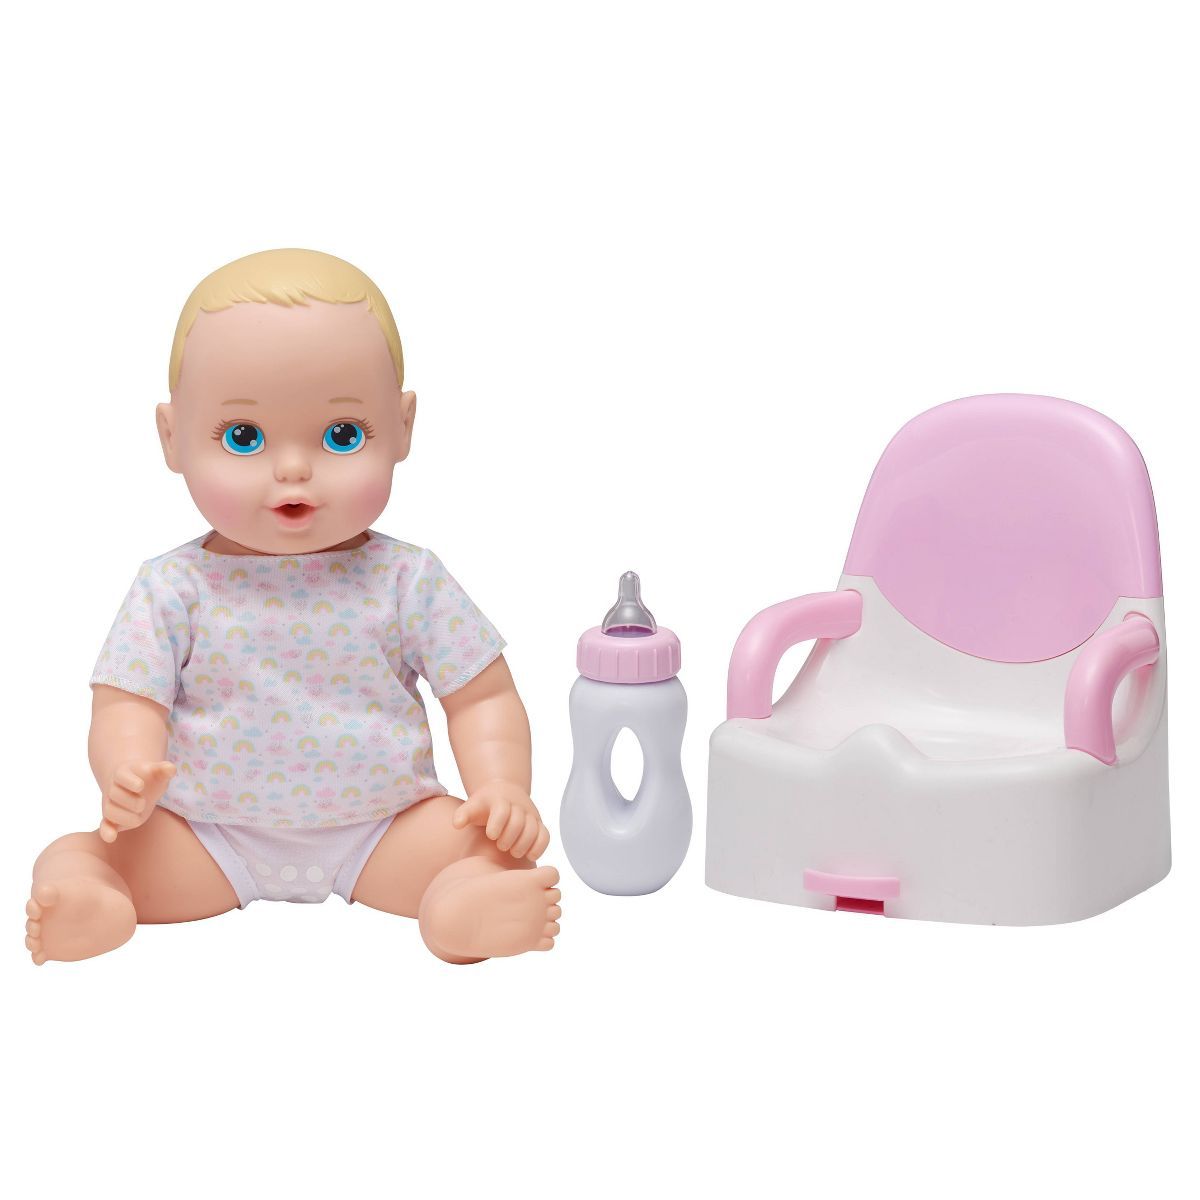 Perfectly Cute Feed & Wet 14" Baby Set - Blonde with Blue Eyes | Target